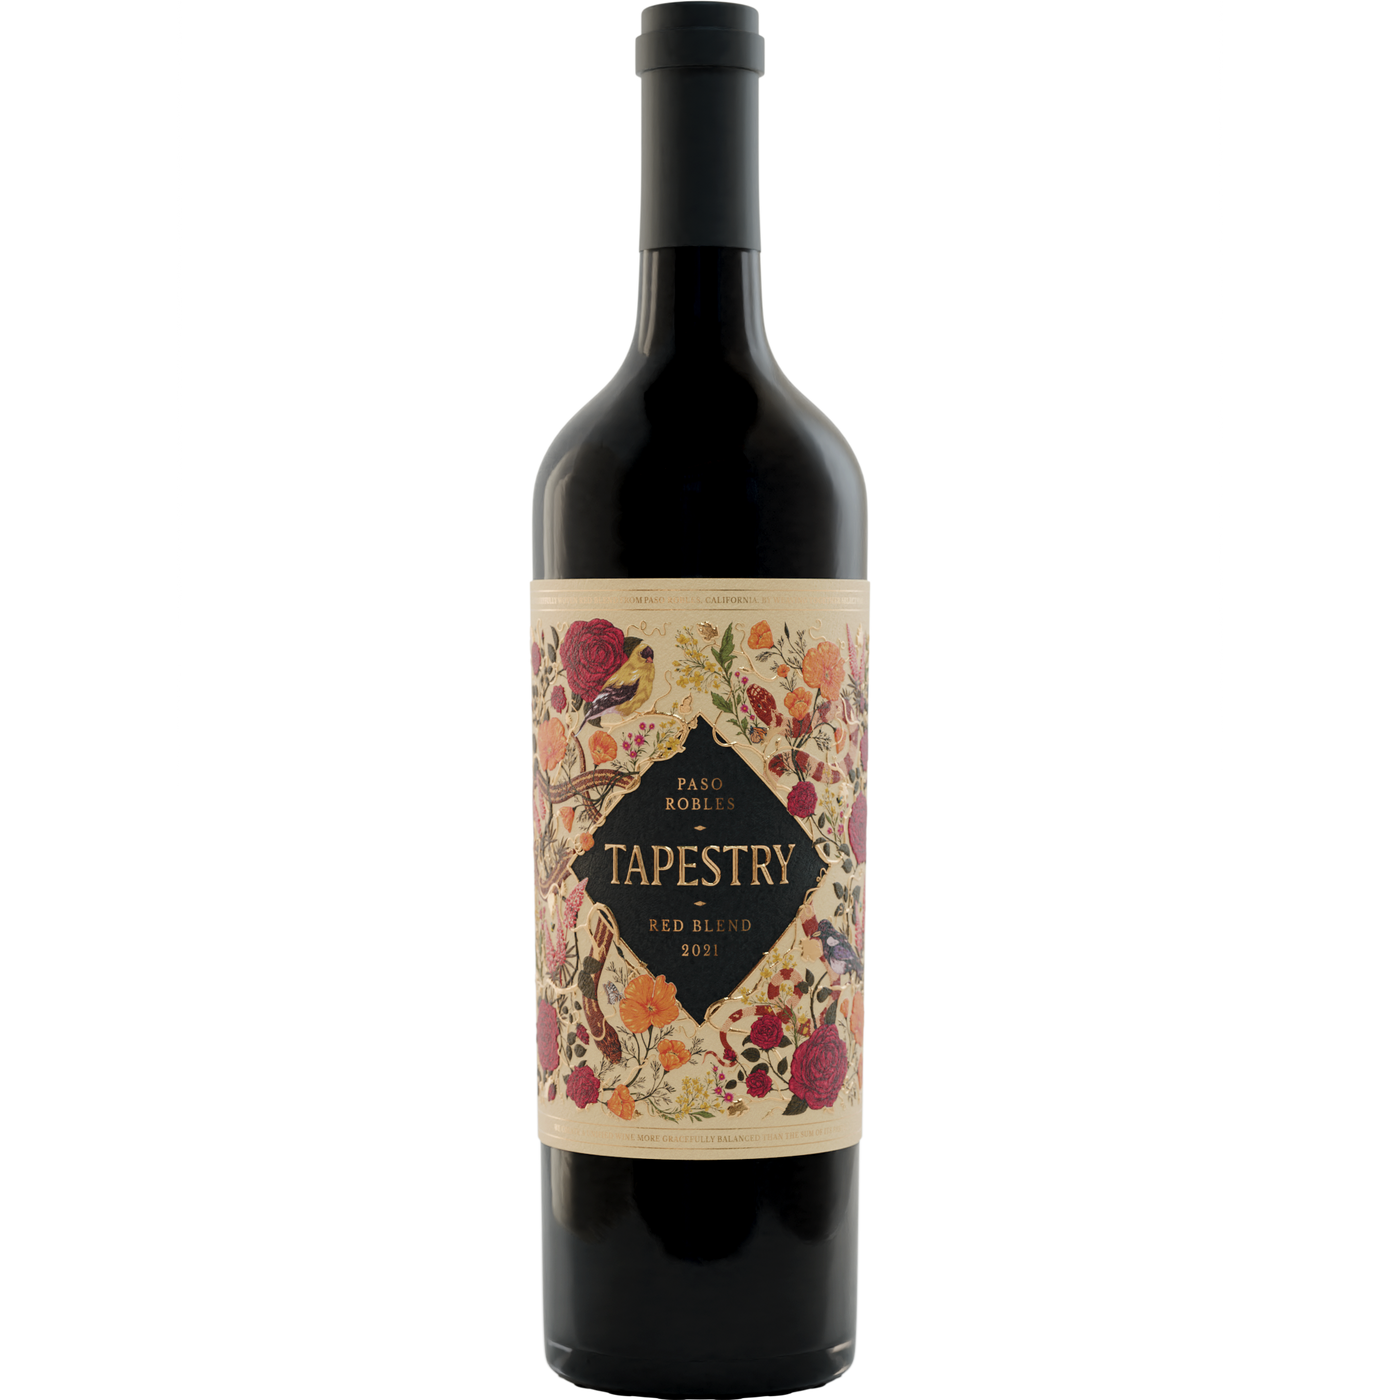 Tapestry Red Blend Paso Robles